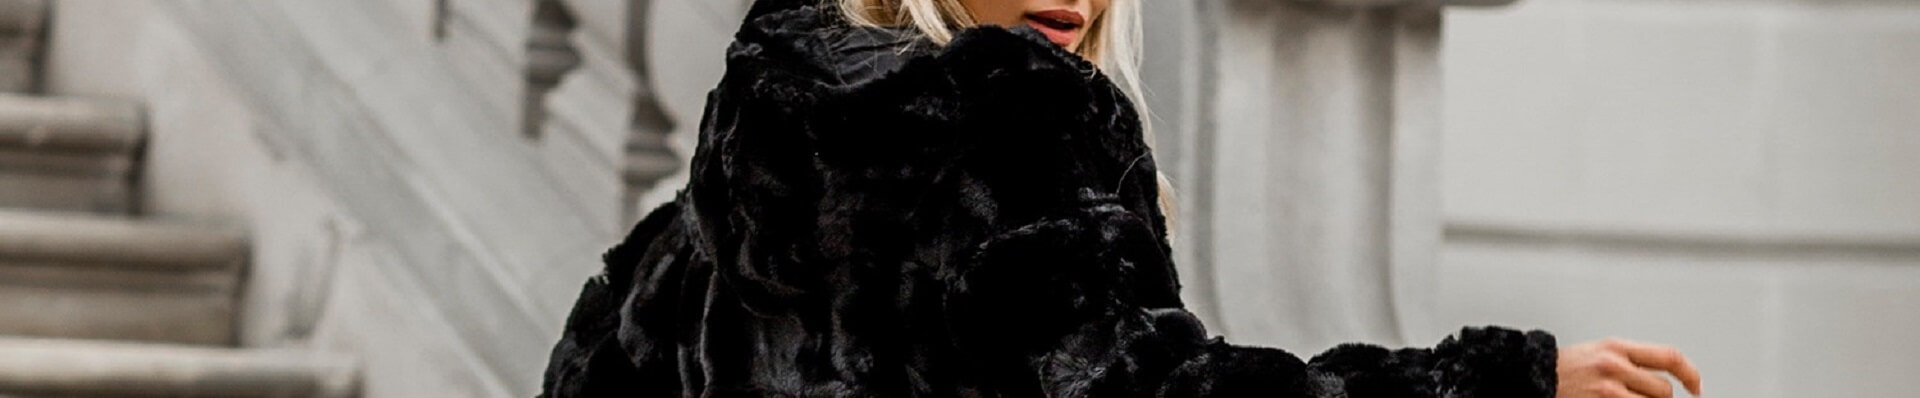 Fur jackets: hot hit this winter